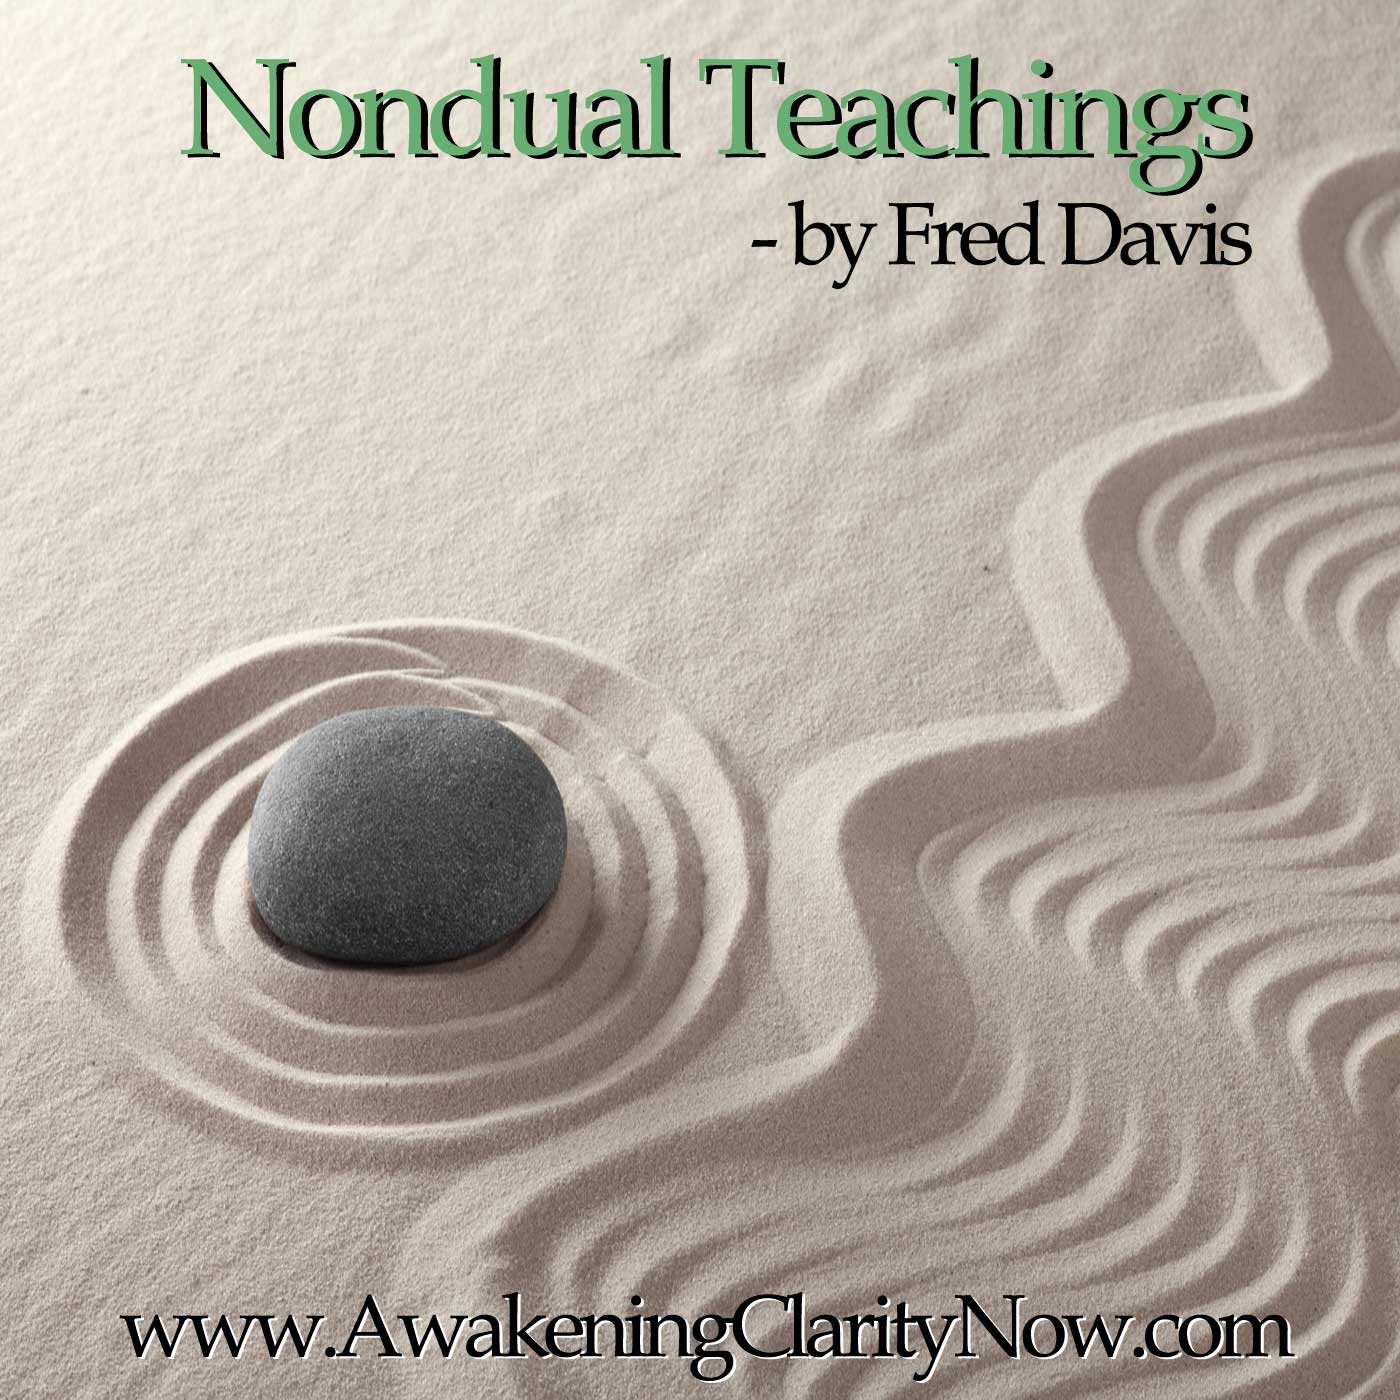 The Living Method of Spiritual Awakening Video Course (See the Website for Details)